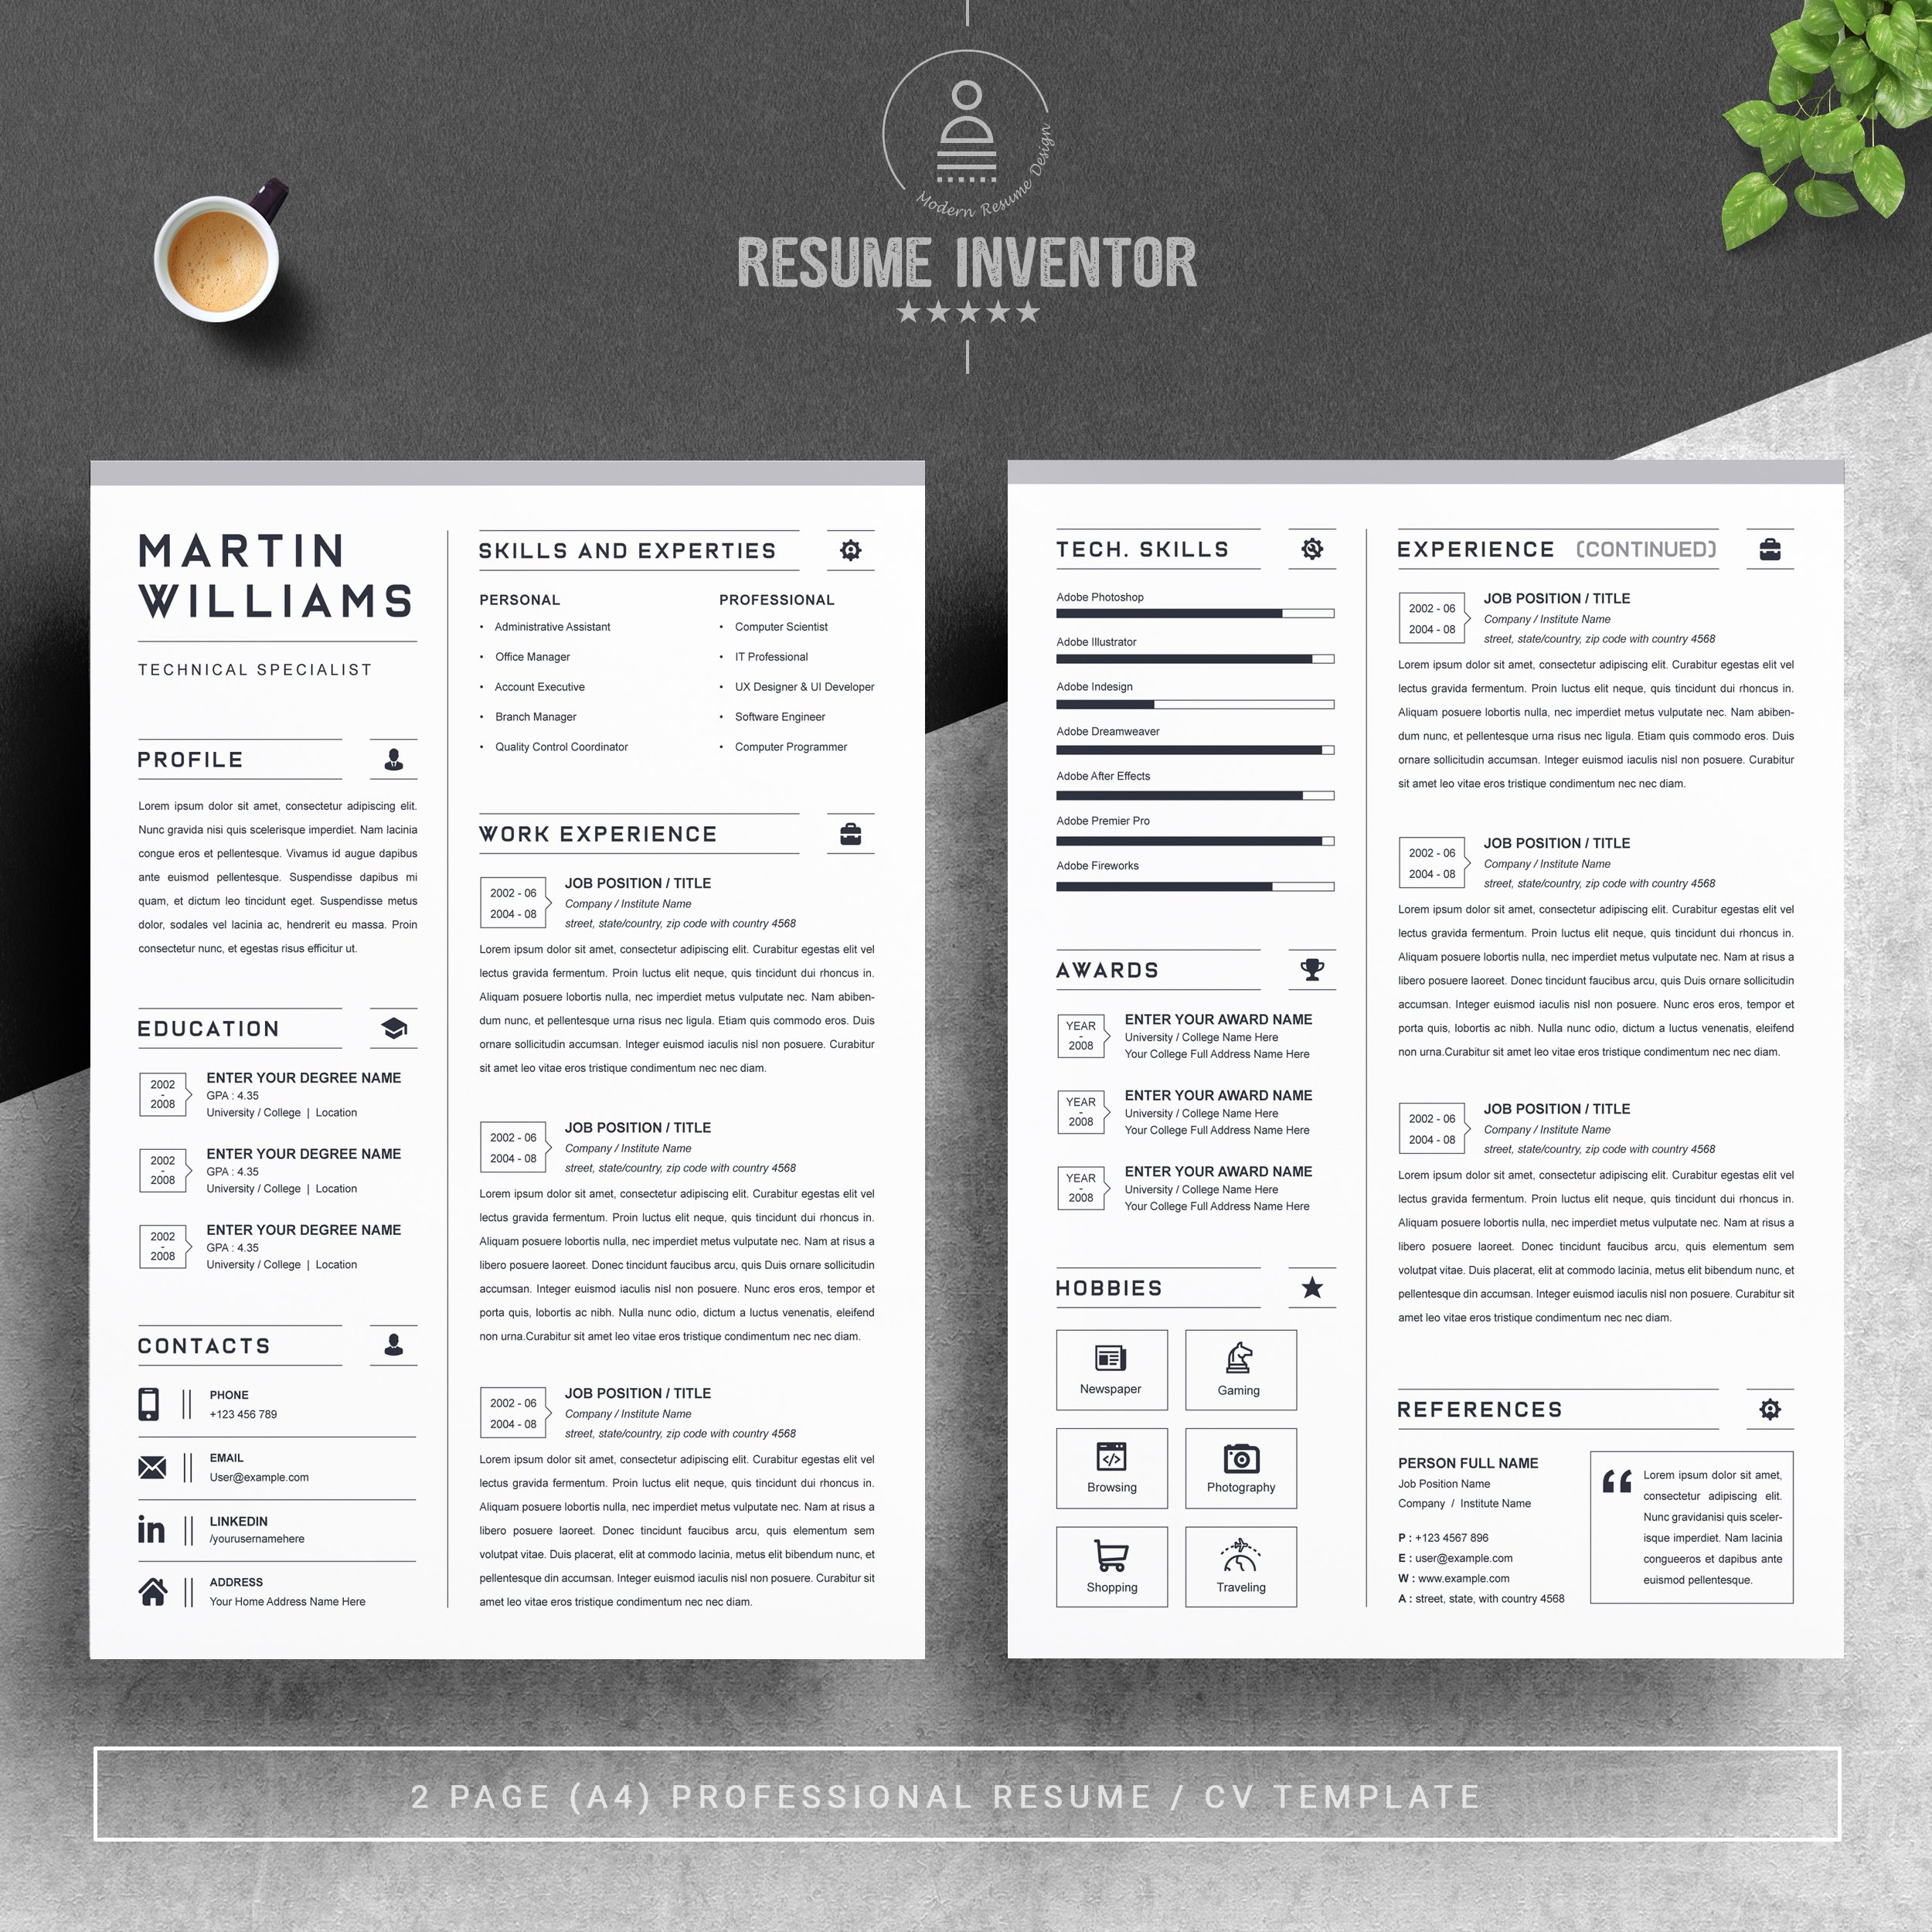 Resume Instant Download, Creative CV preview image.